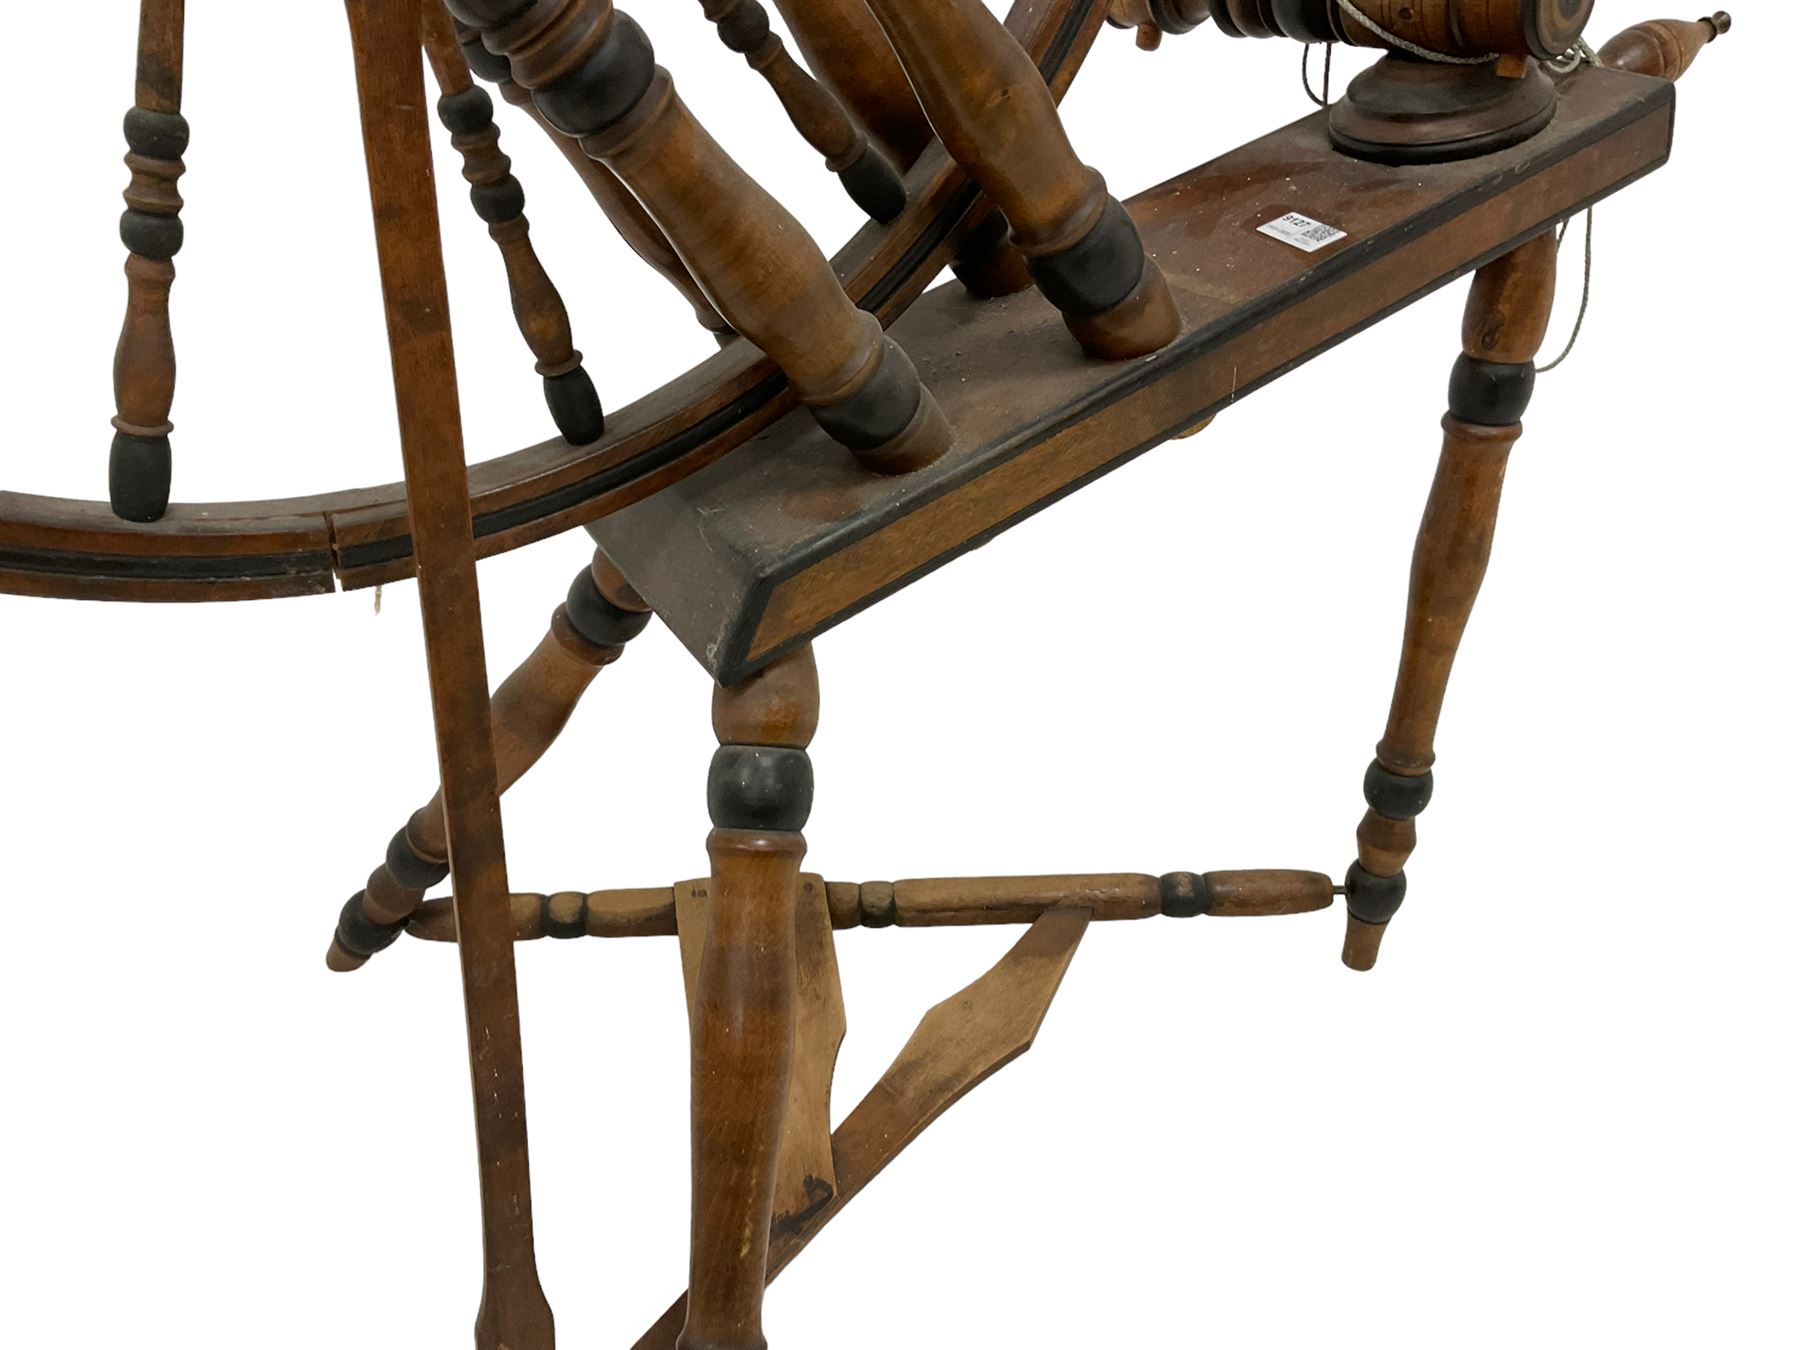 19th century beech spinning wheel with turned finials - Image 3 of 4